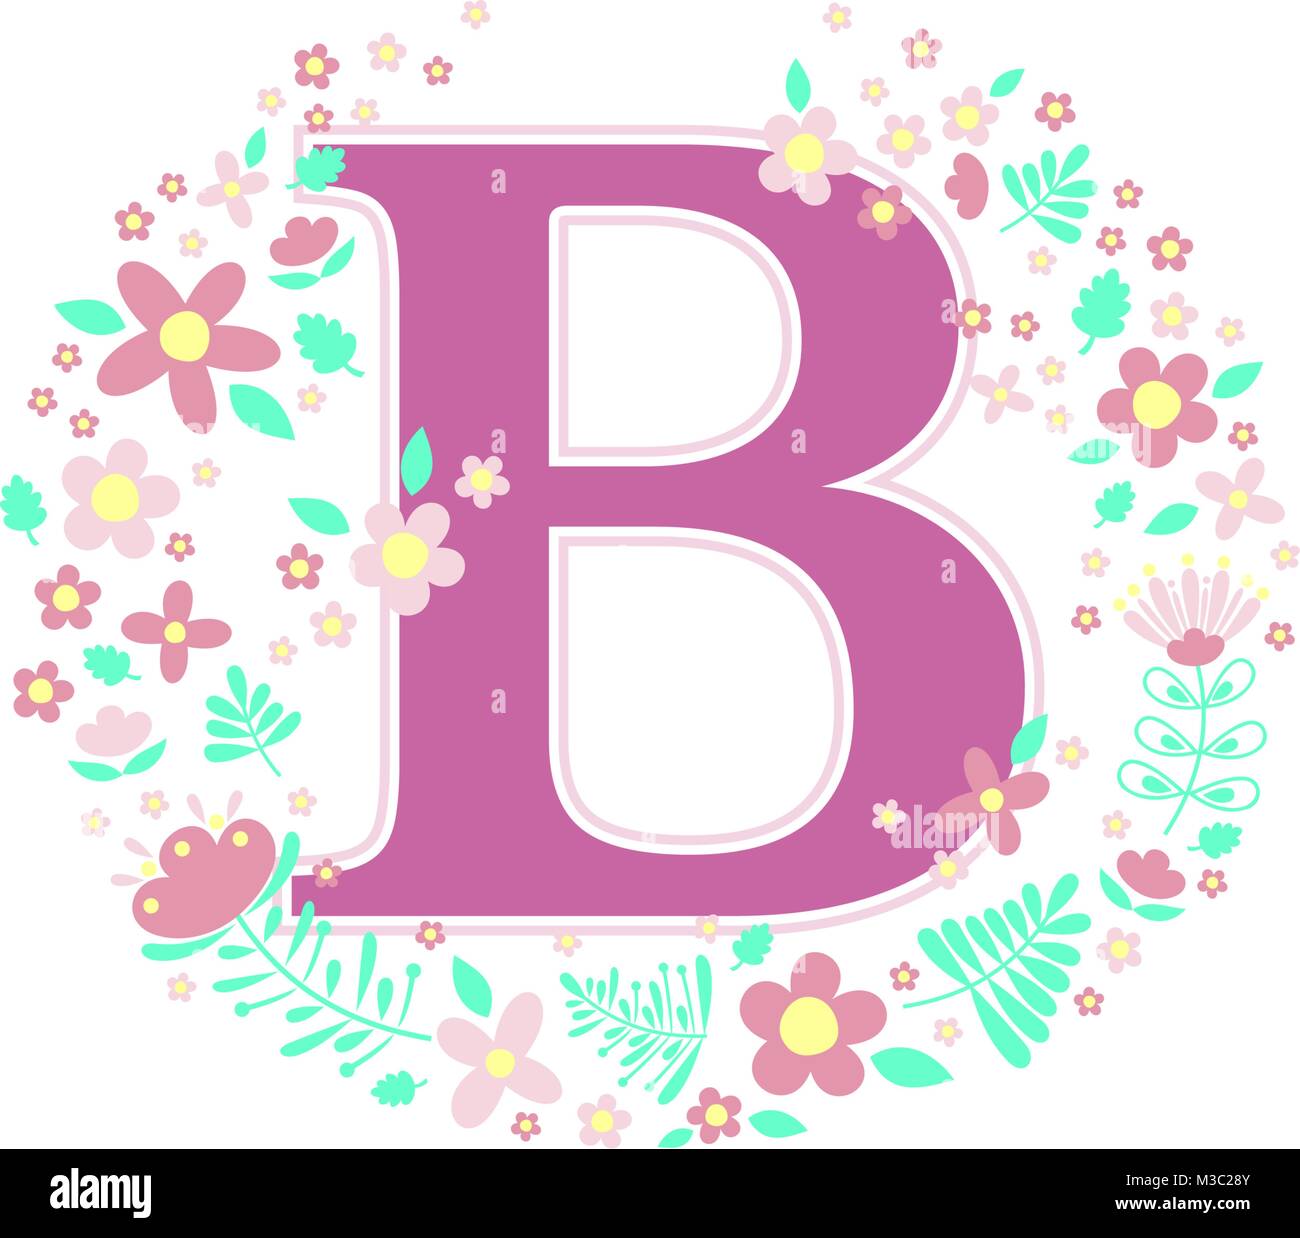 initial letter b with decorative flowers and design elements isolated on white background. can be used for baby name, nursery decoration, spring theme Stock Vector